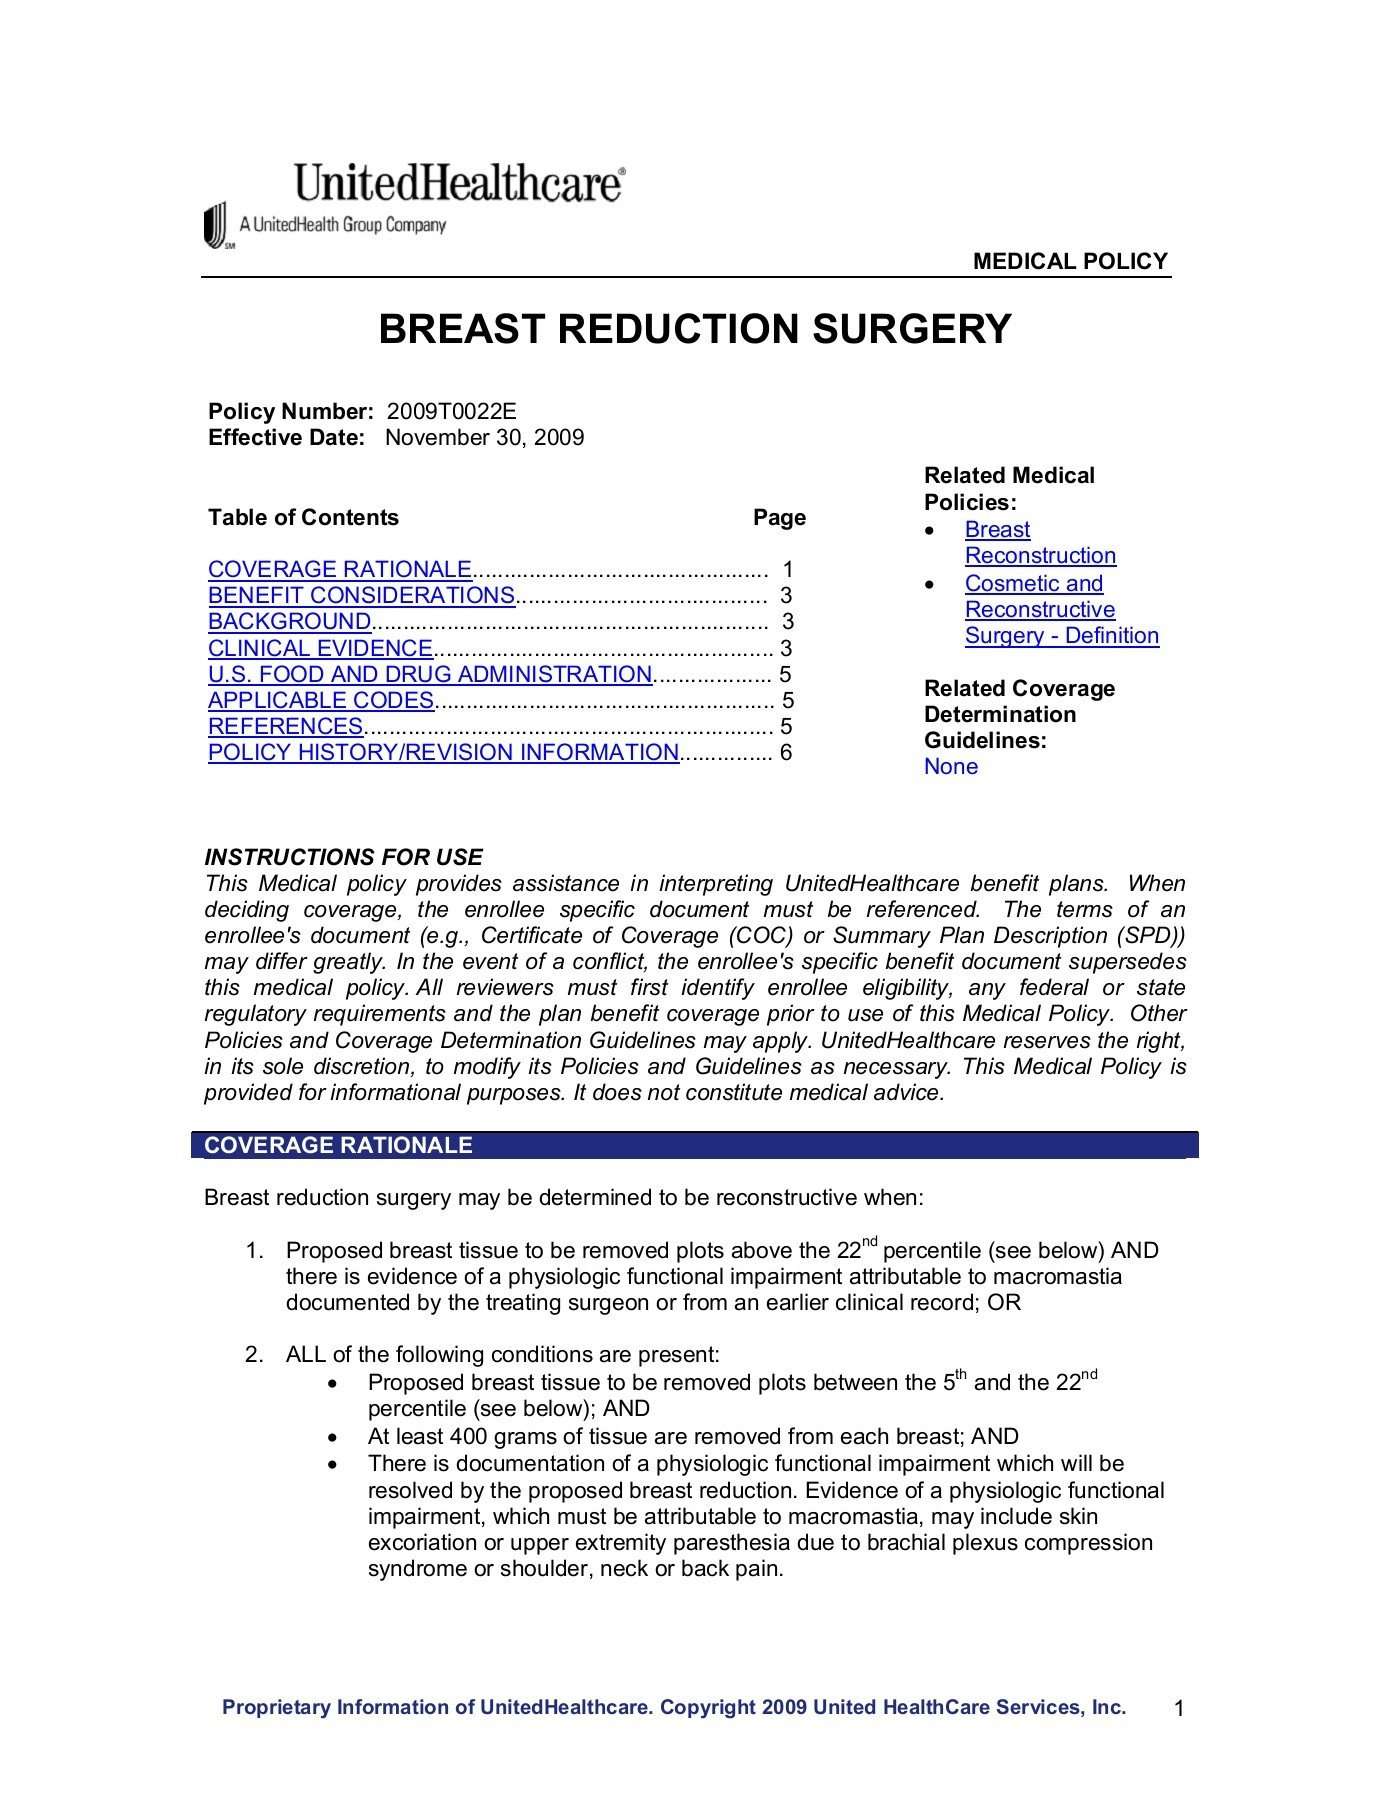 Does Unitedhealthcare Community Plan Cover Breast ...